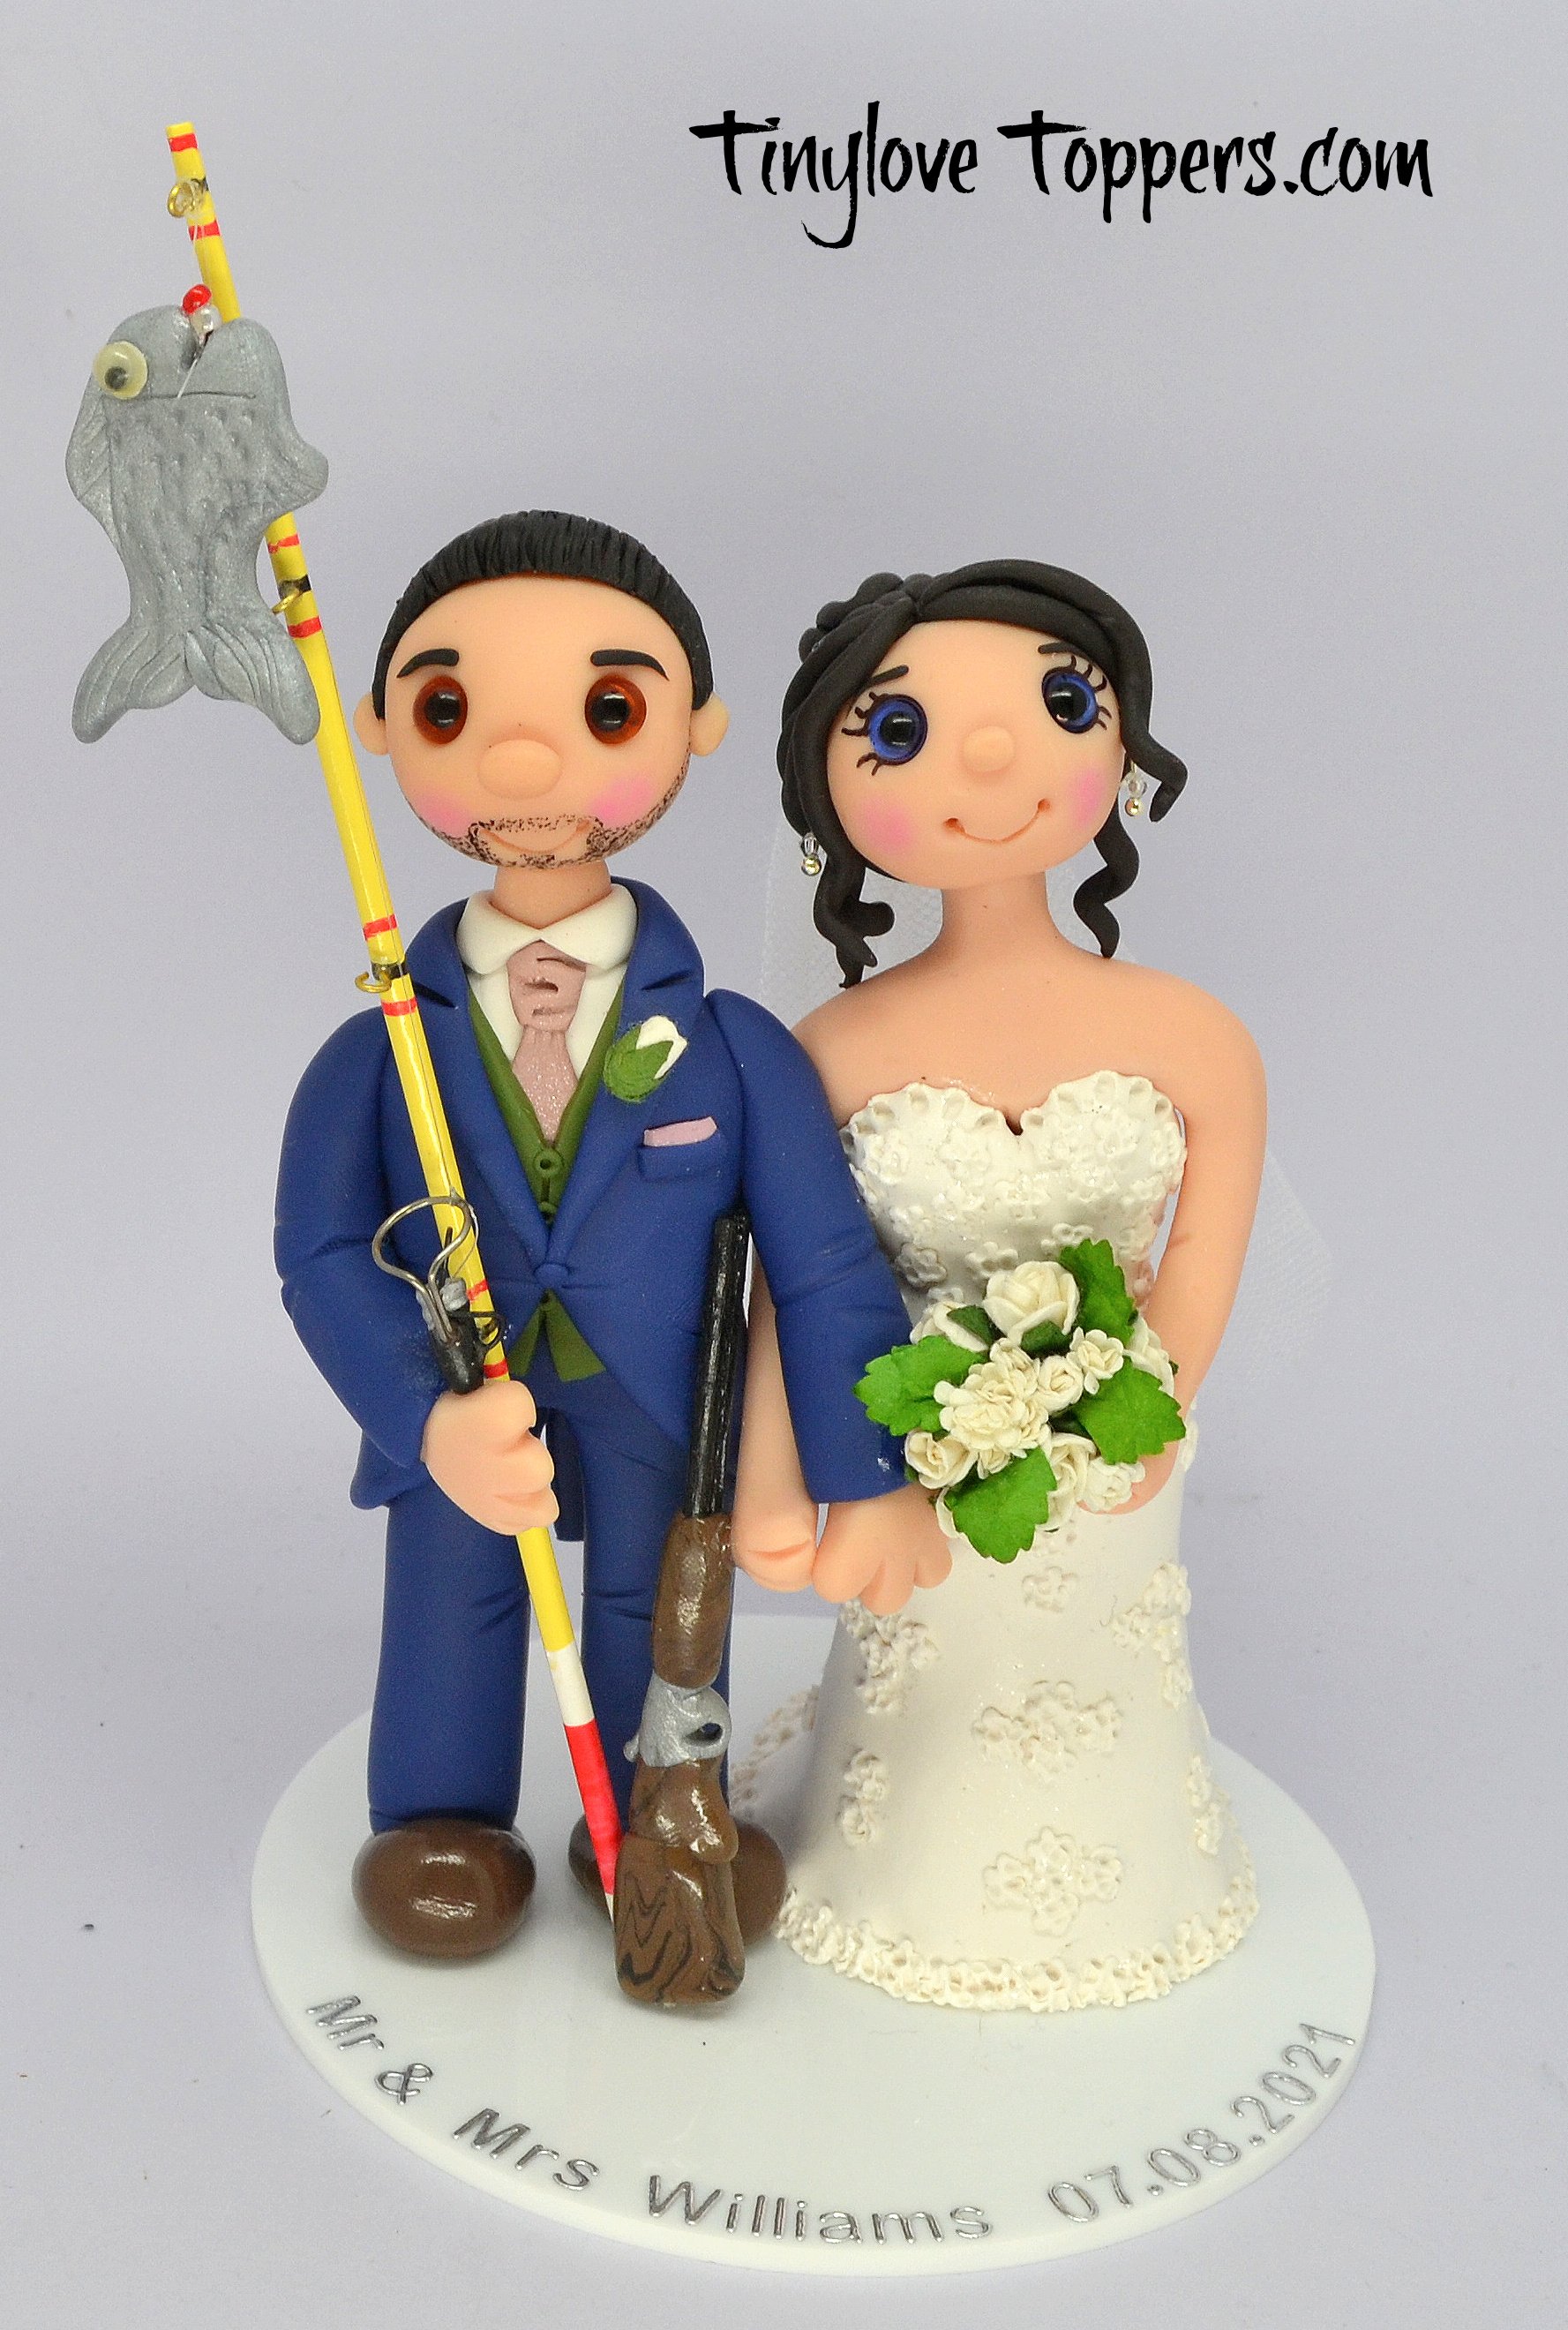 Wedding cake toppers for forever keepsakes — TINYLOVE WEDDING CAKE TOPPERS